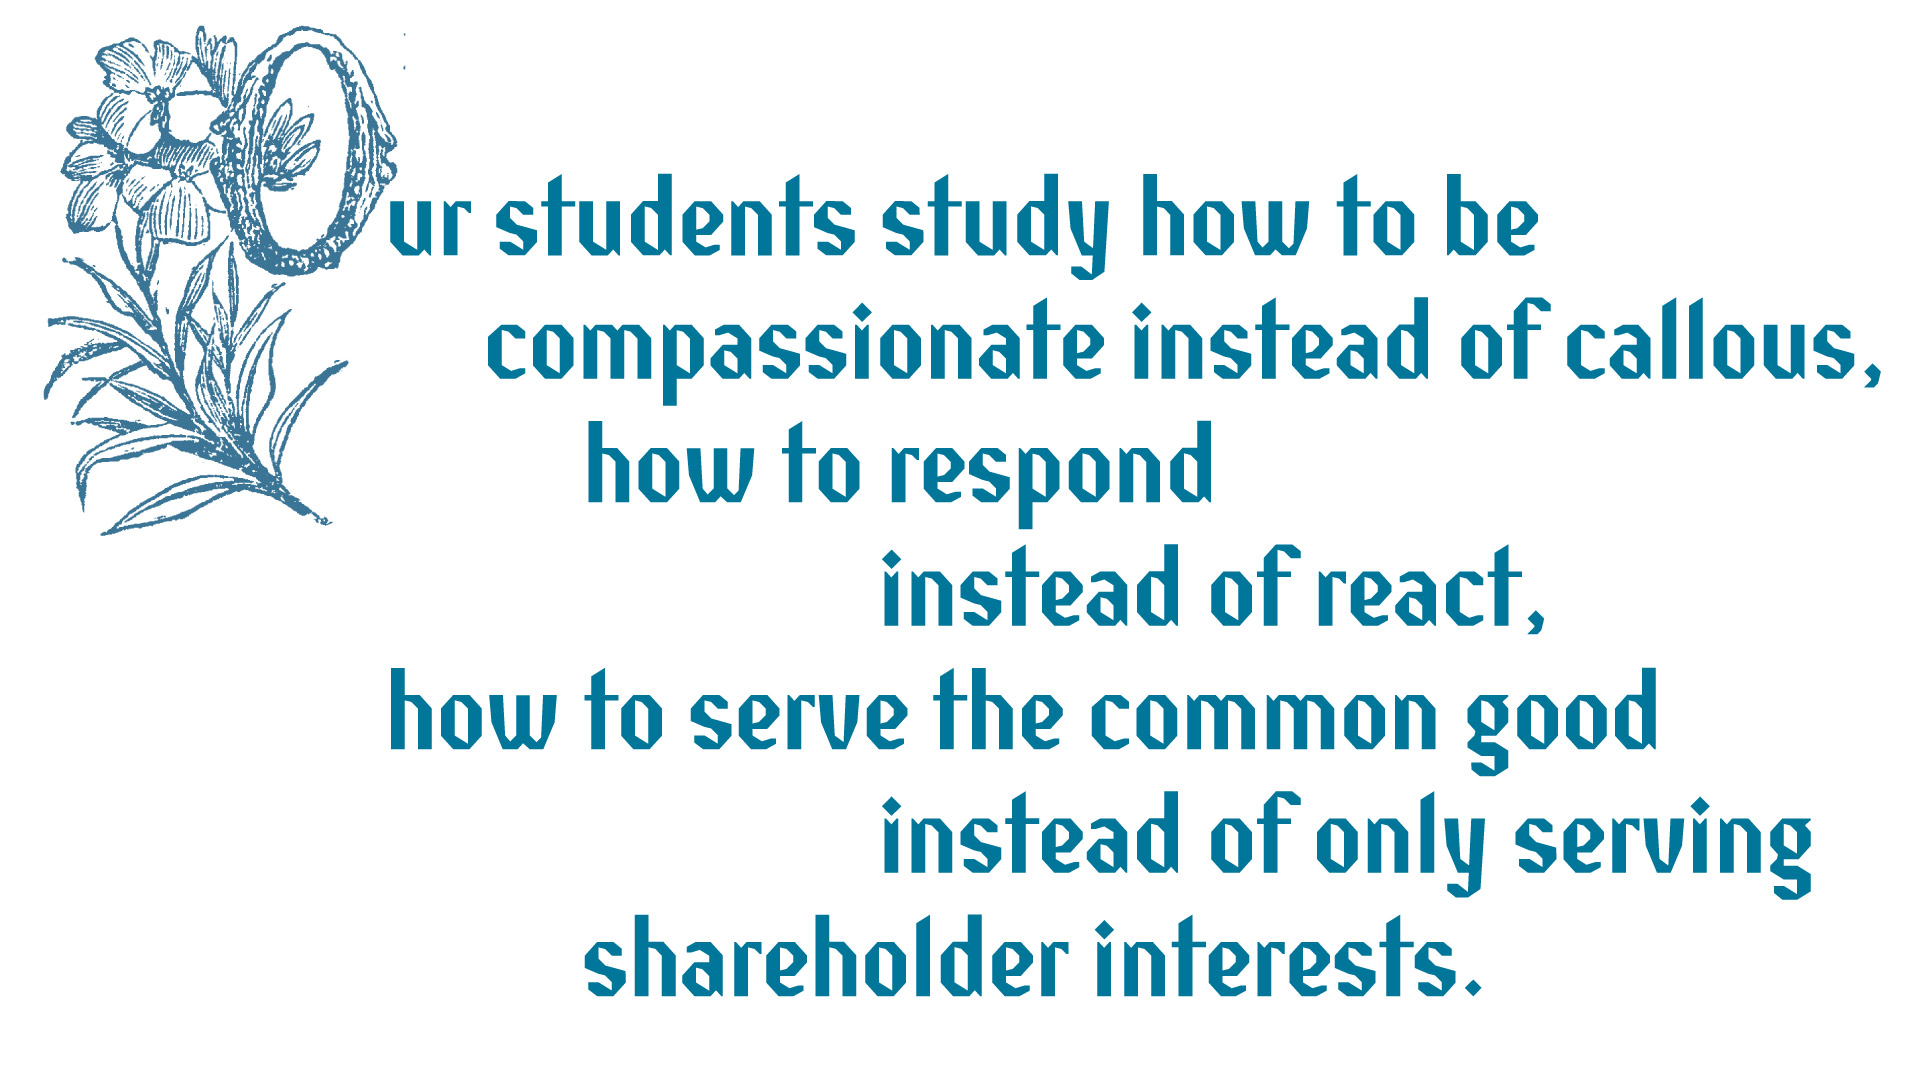 Our students study how to be compassionate instead of callous, how to respond instead of react, how to serve the common good instead of only serving shareholder interests.